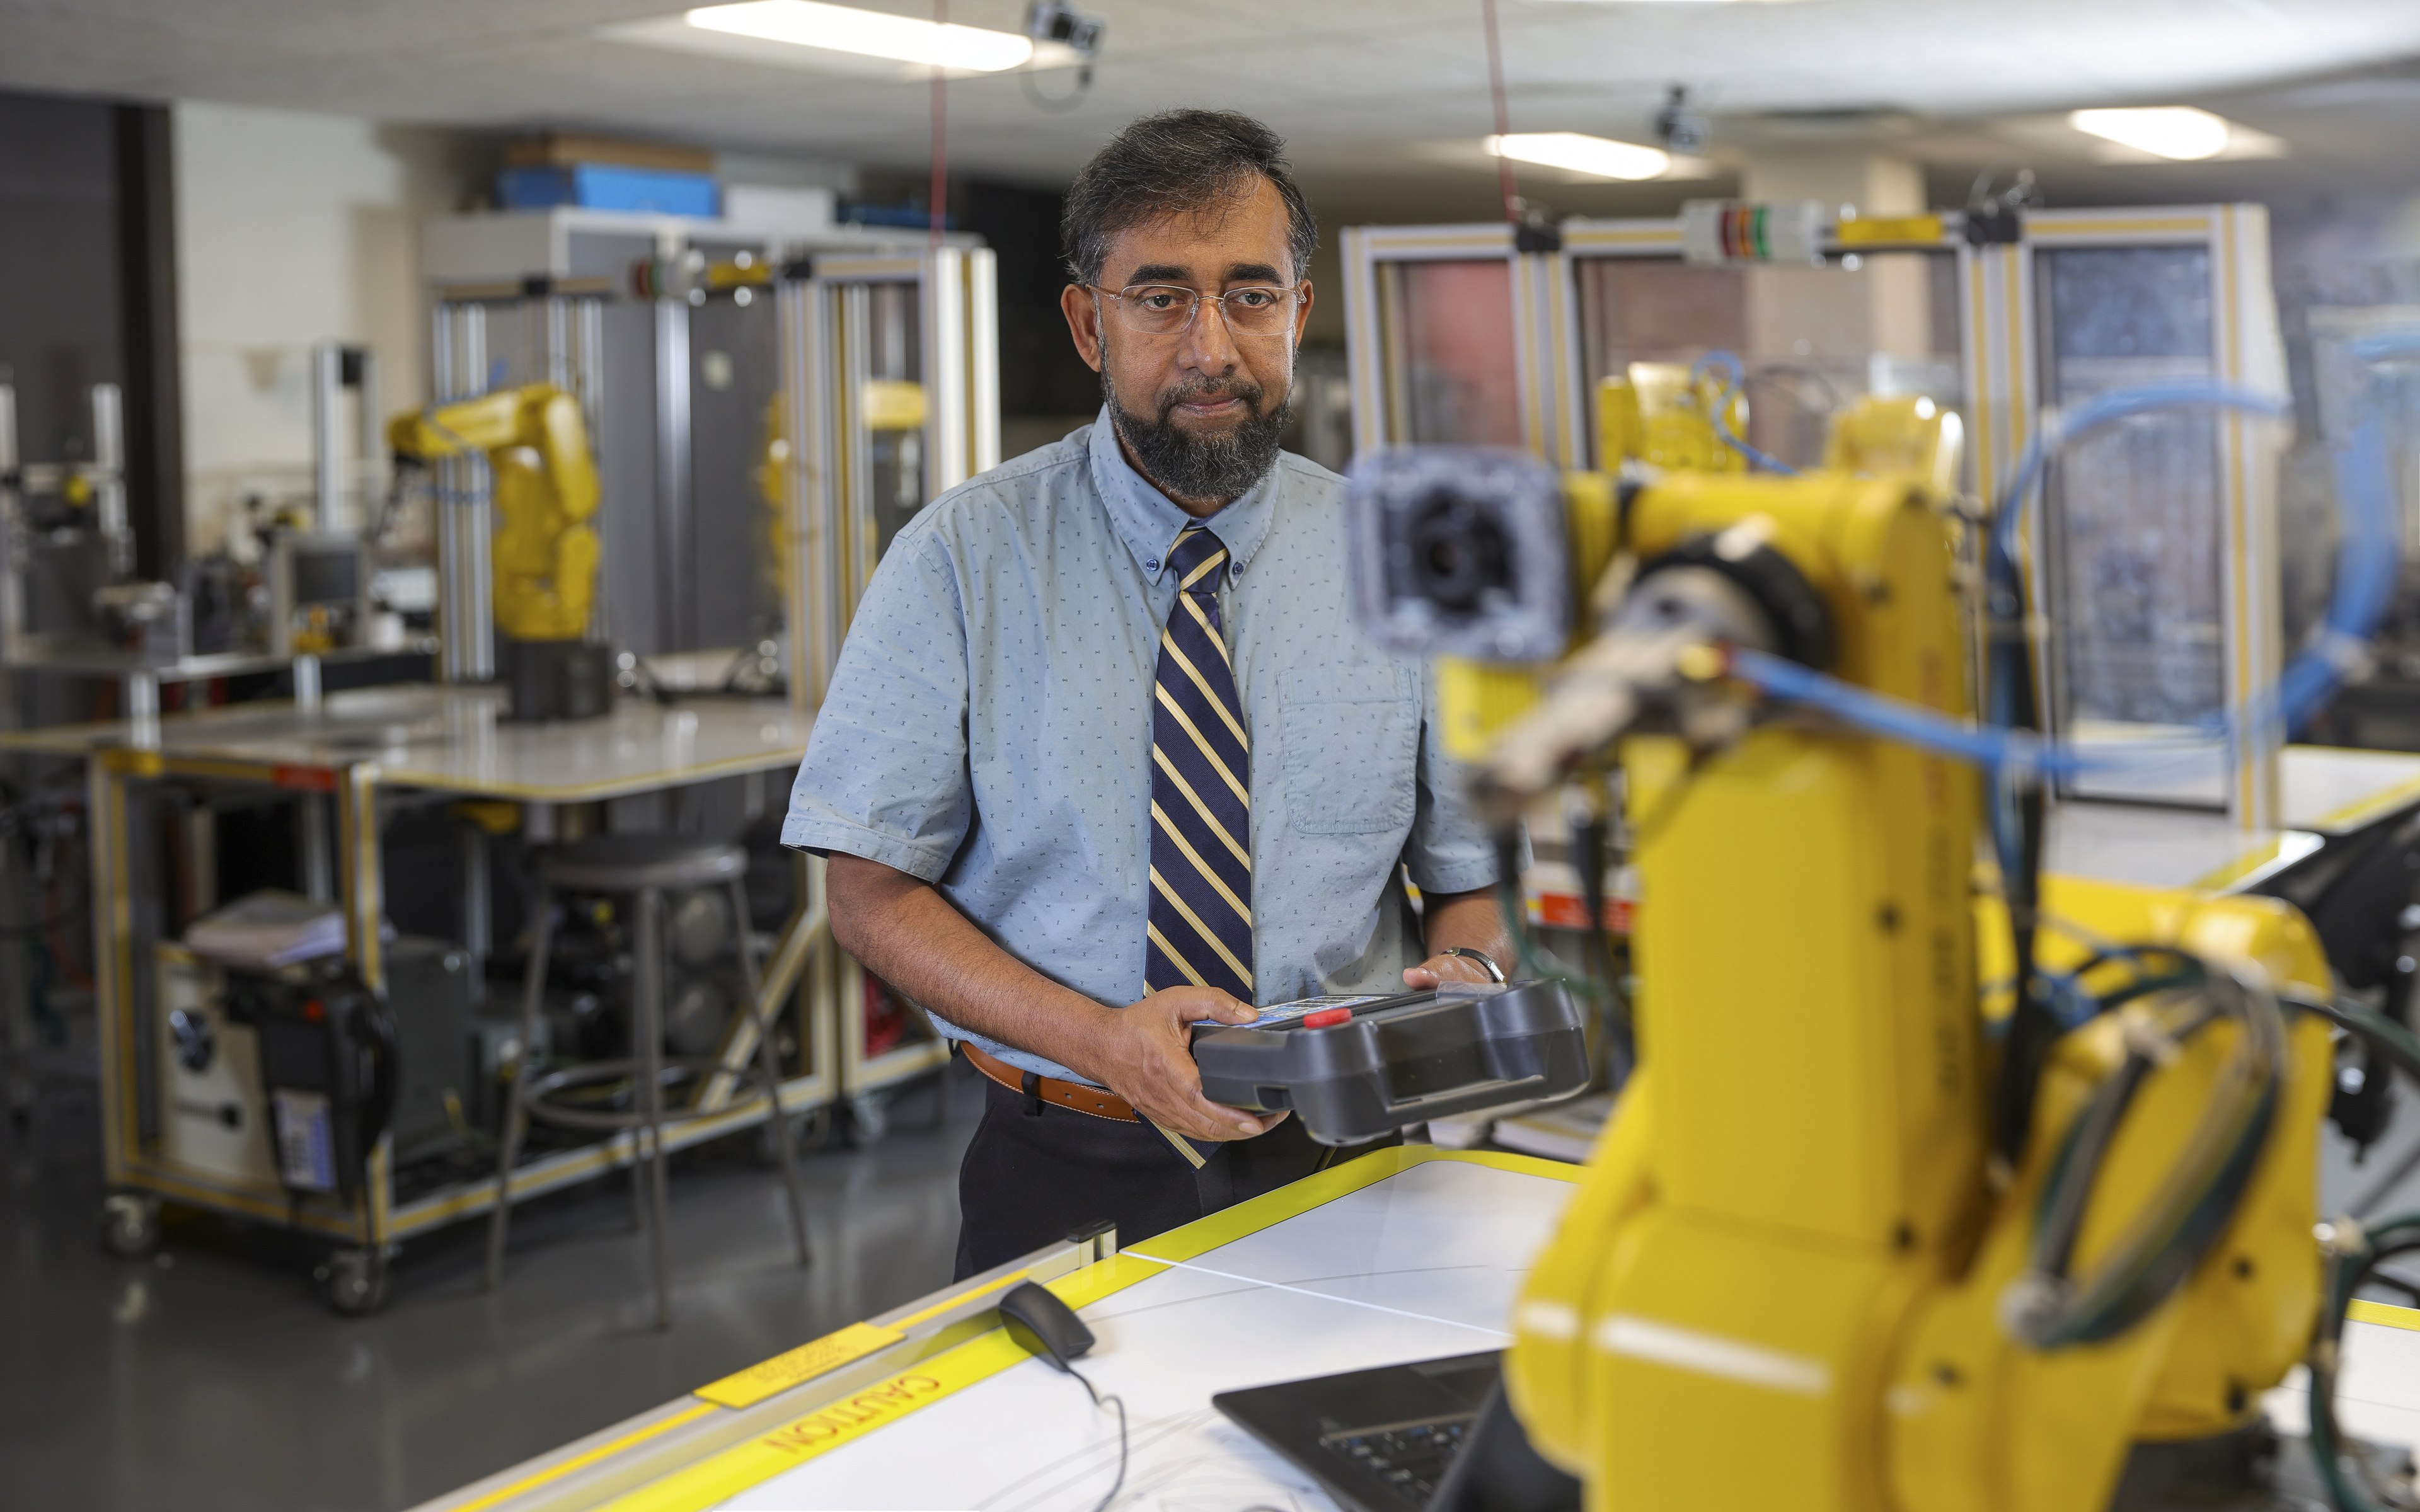 MD Sarder holds a large electronic device to control a Fanuc robot, which is in the foreground. 